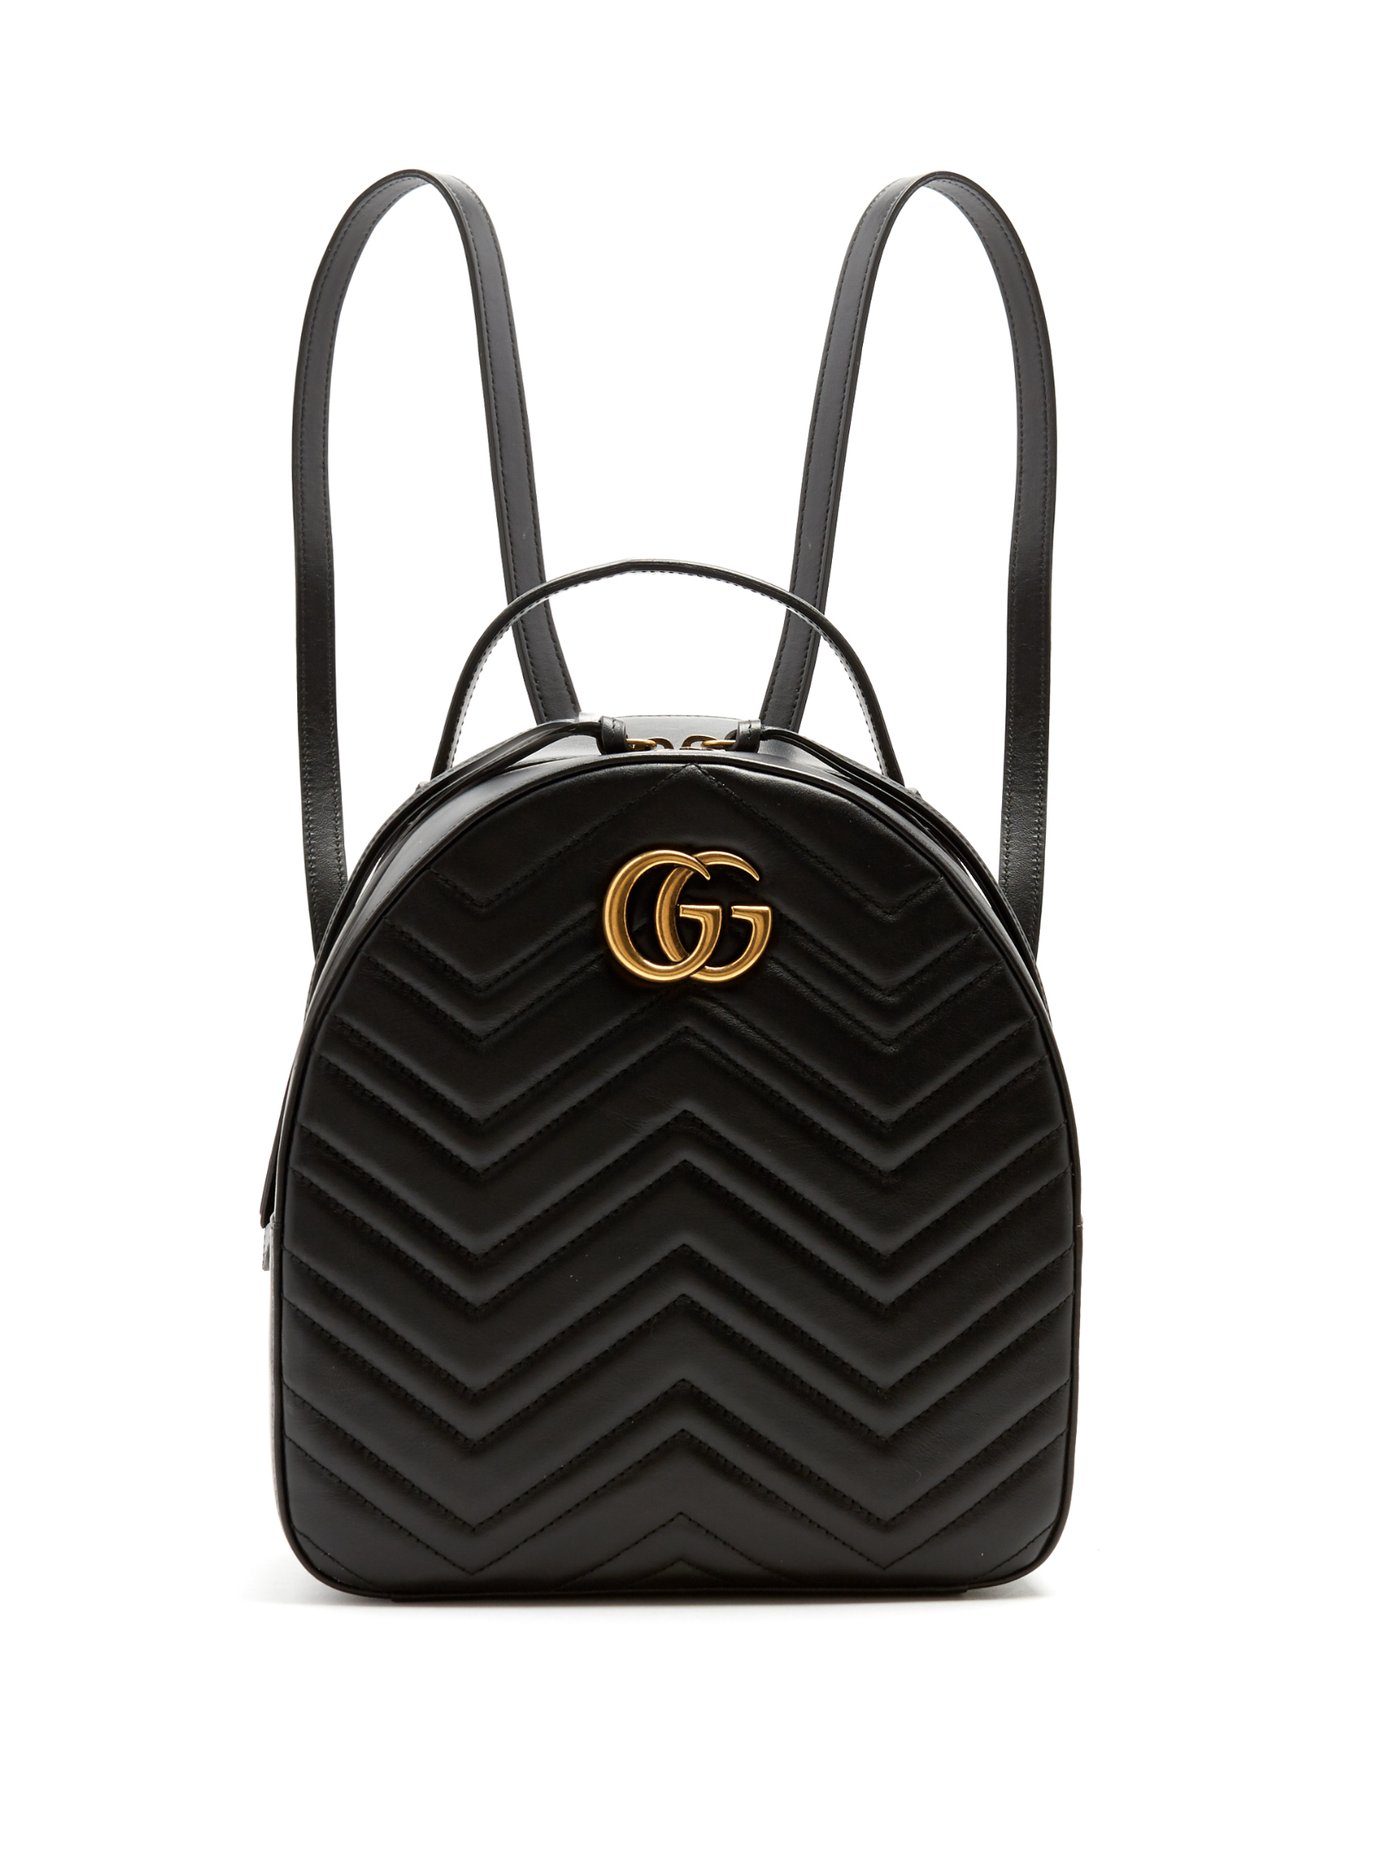 gucci marmont backpack price